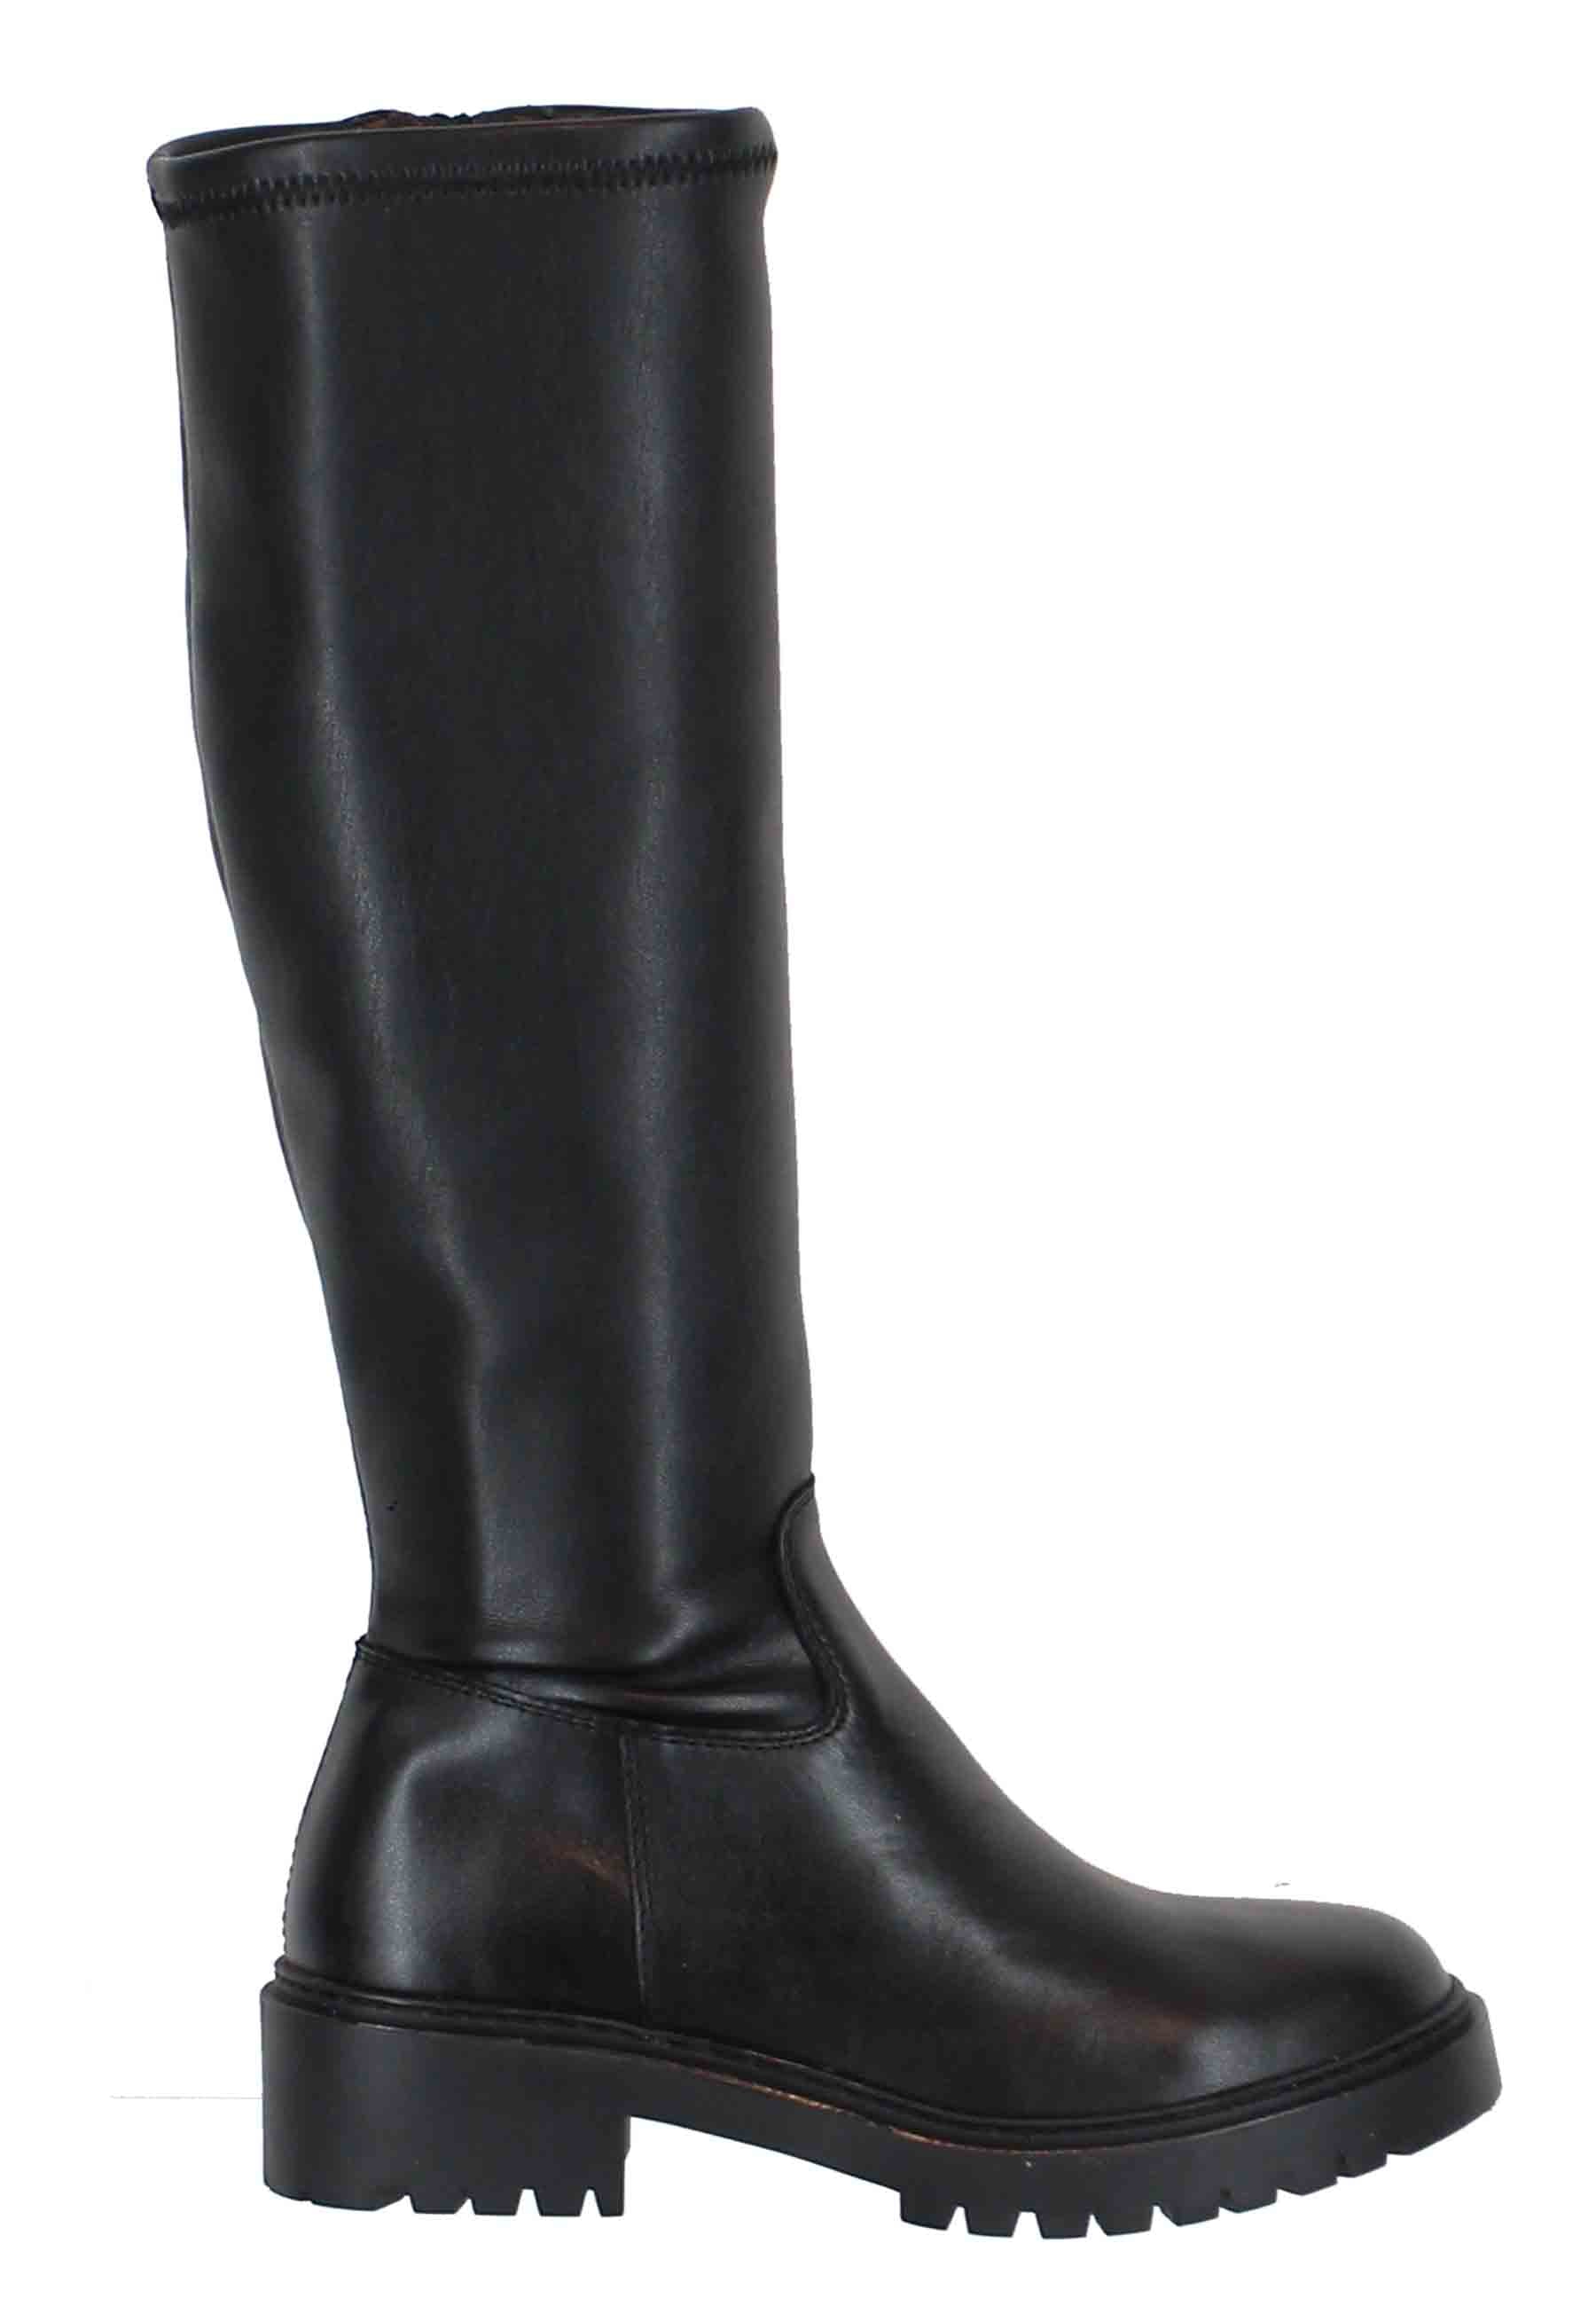 Women's black leather boots with lug sole and round toe